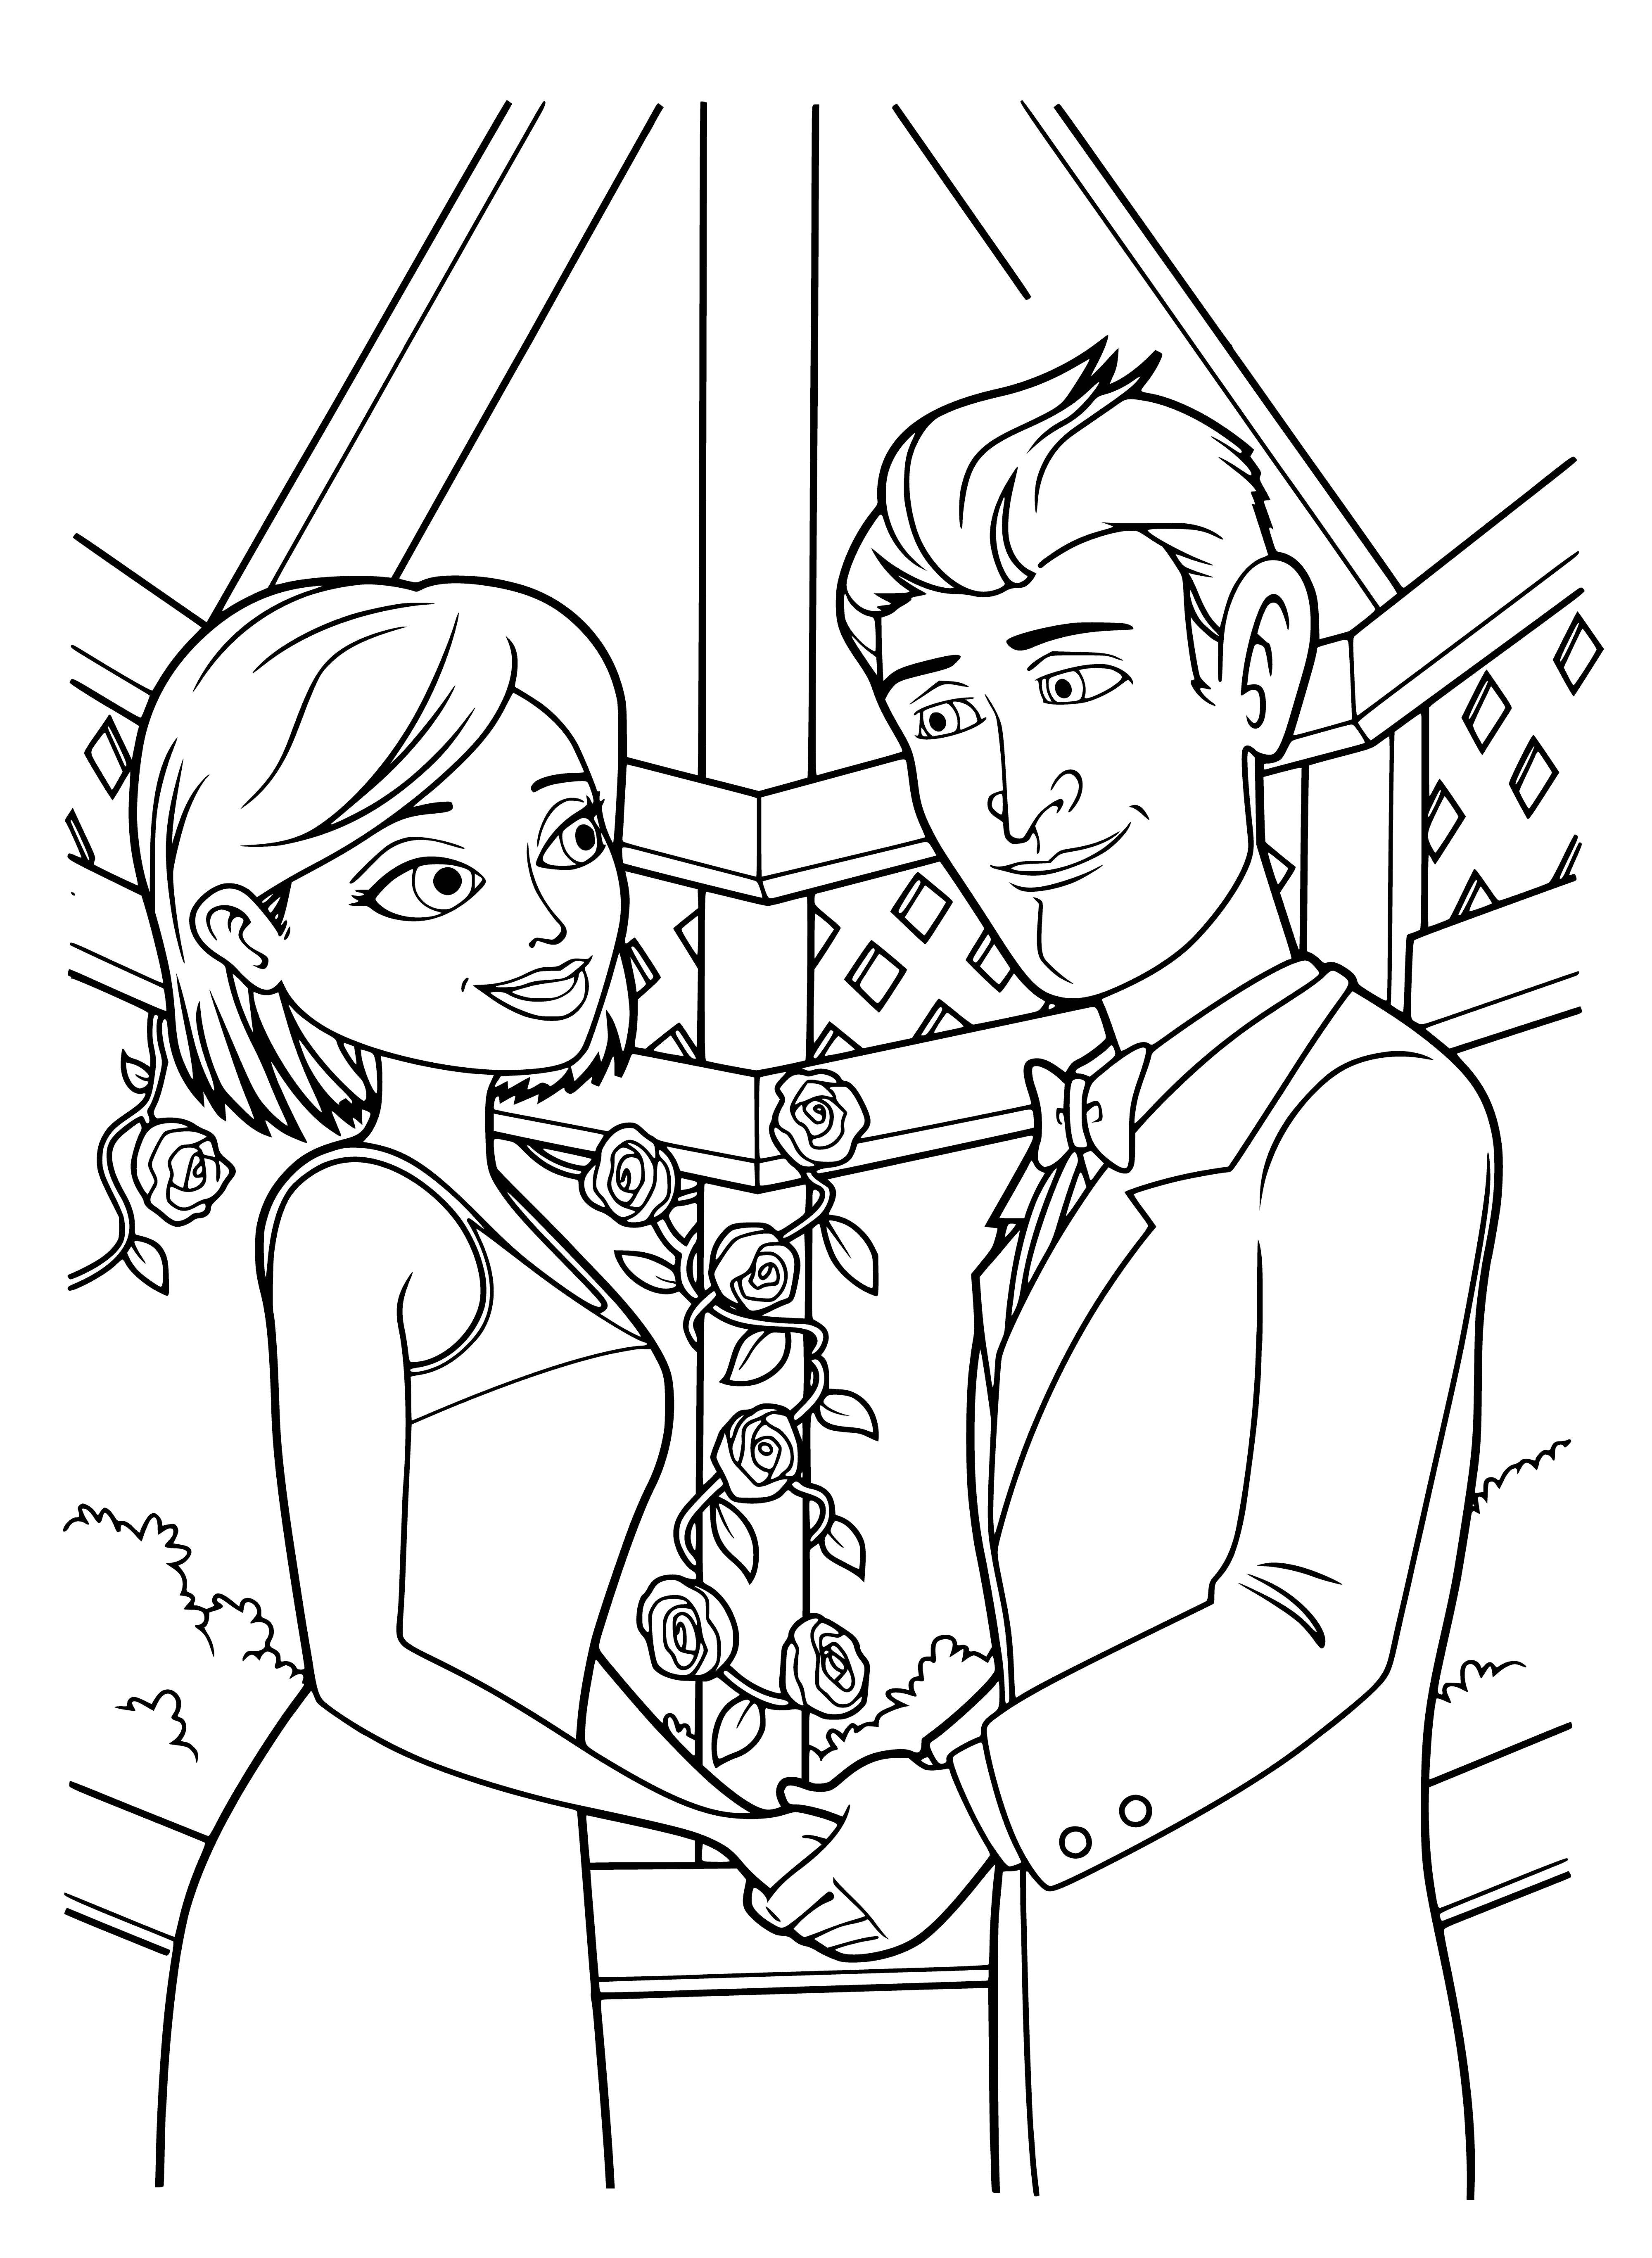 coloring page: Two mystifying beings exchange flowers in a peaceful alien world full of greenery.